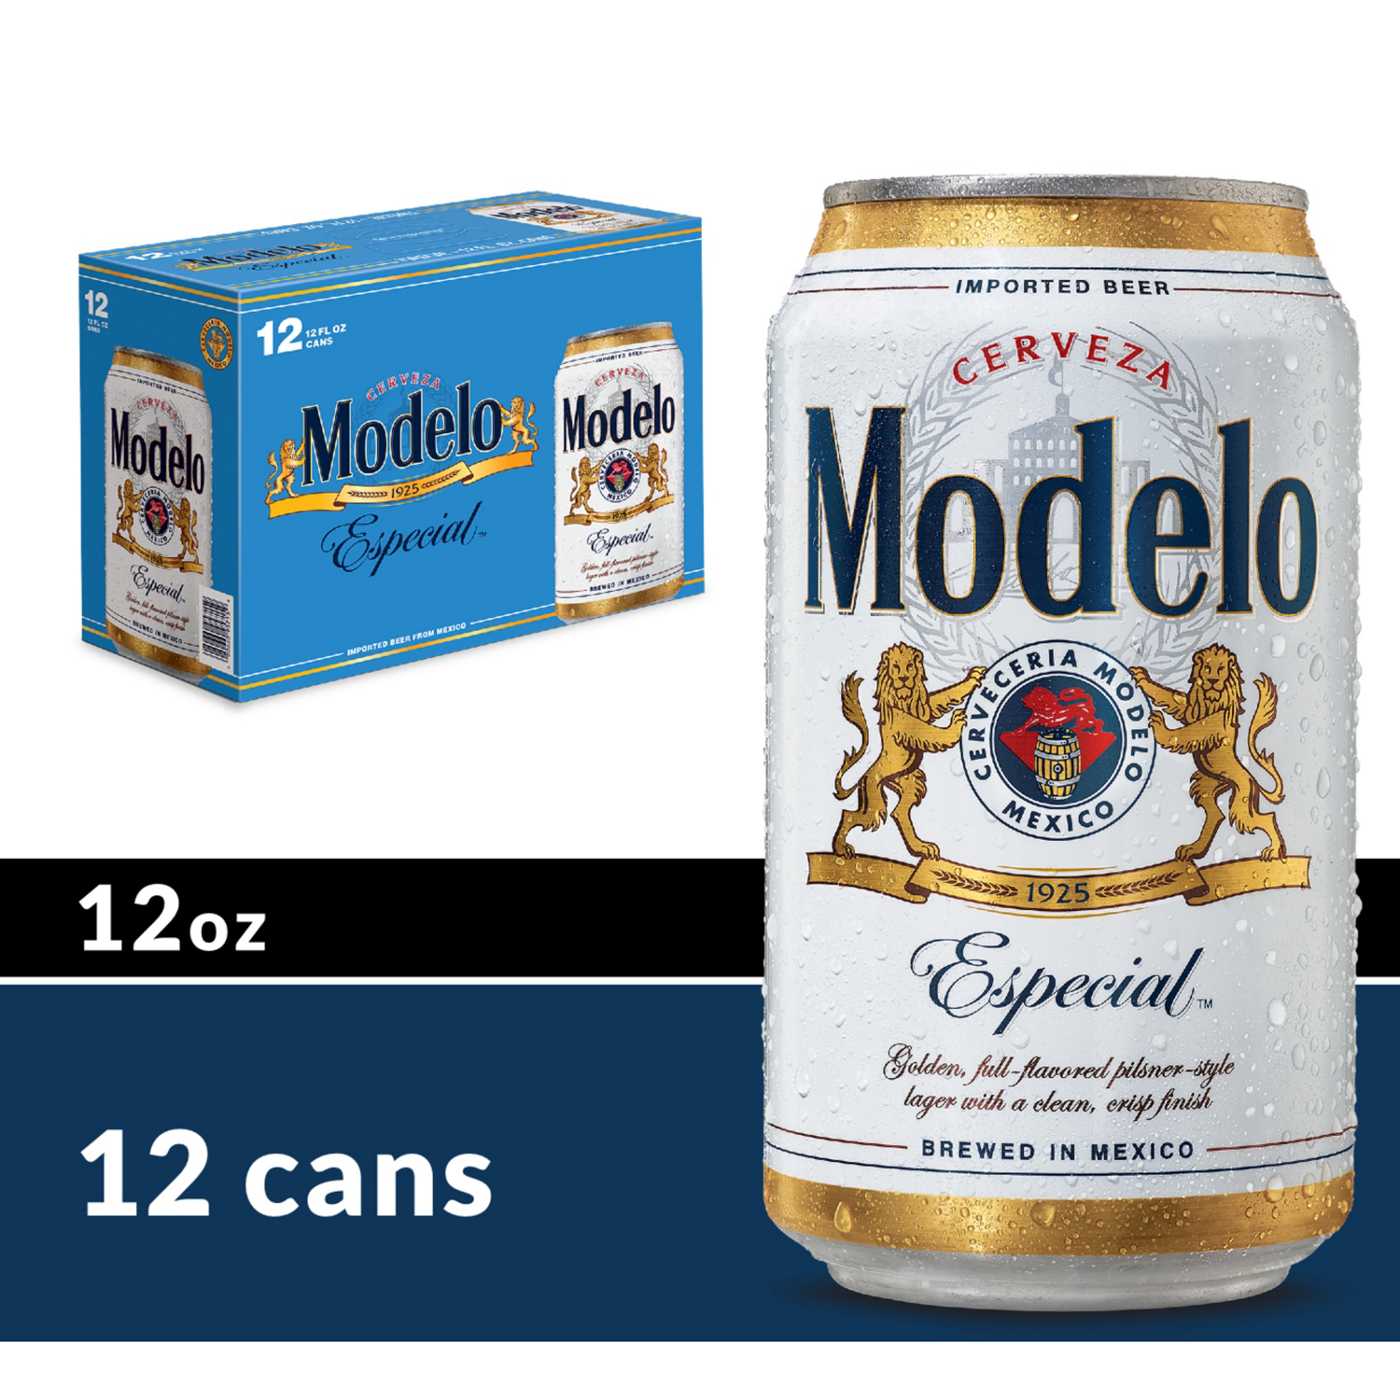 Modelo Especial Mexican Lager Import Beer 12 oz Cans, 12 pk; image 3 of 7